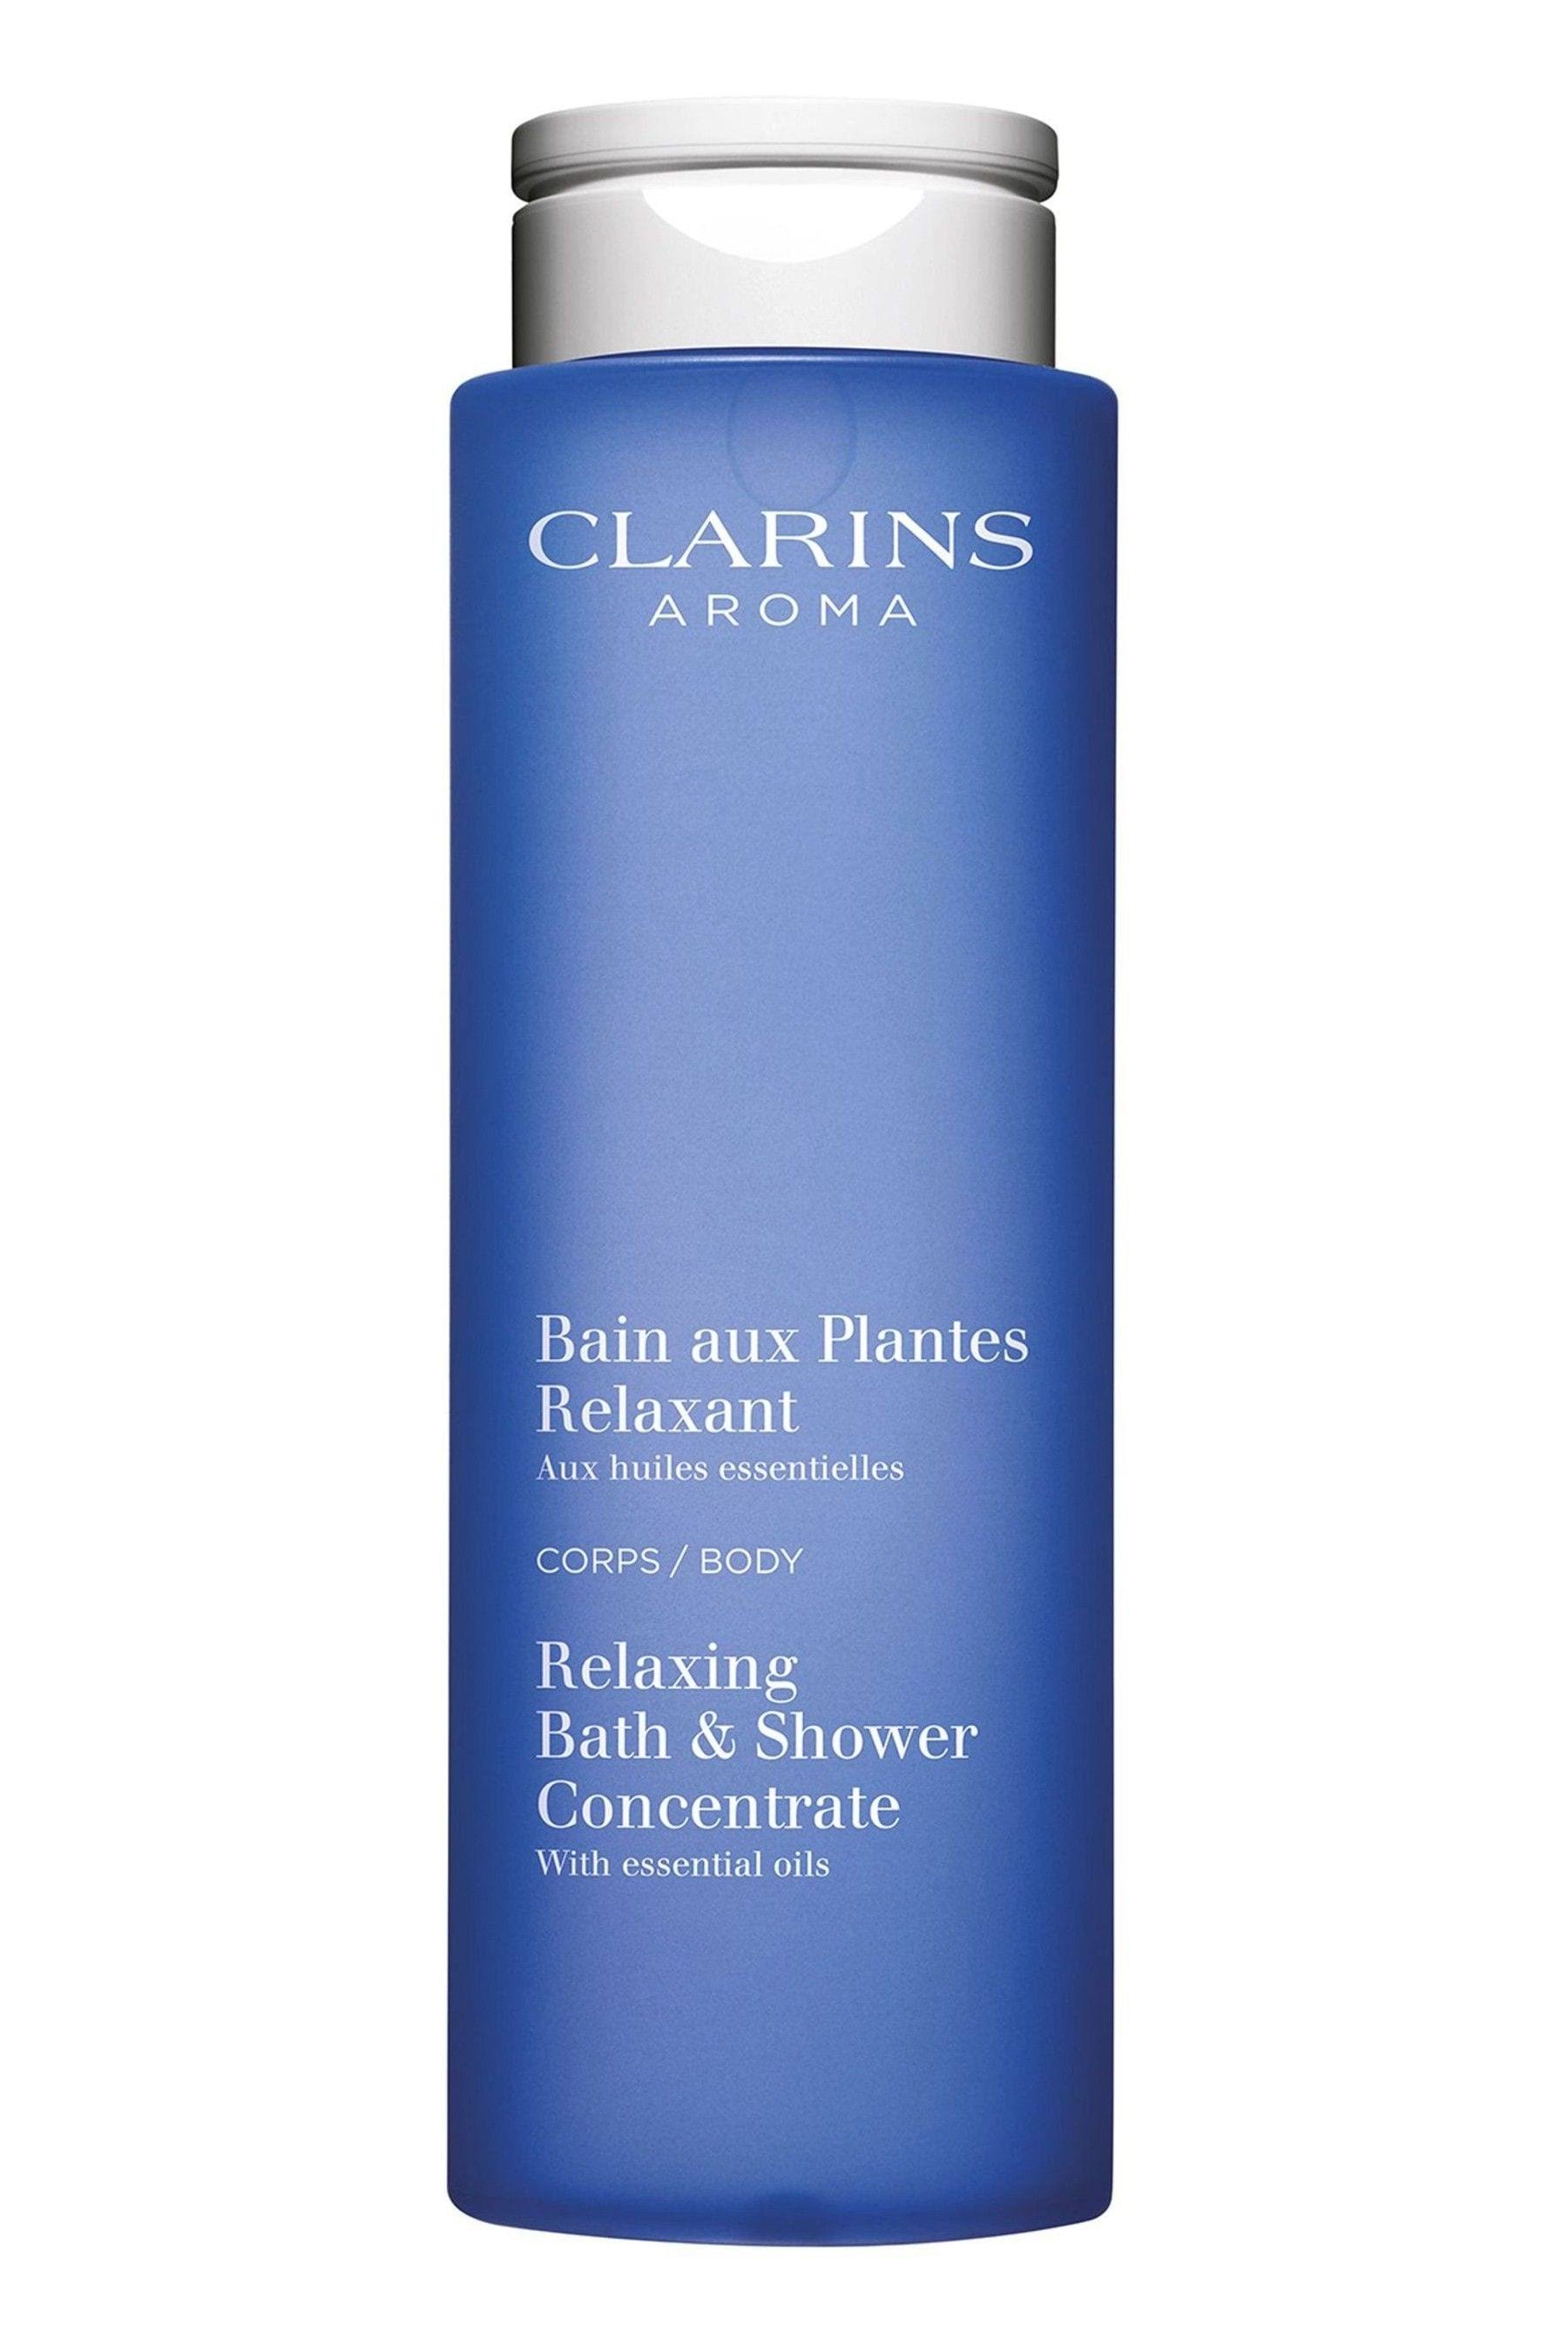 Clarins Relaxing Bath & Shower Concentrate - 200 ml